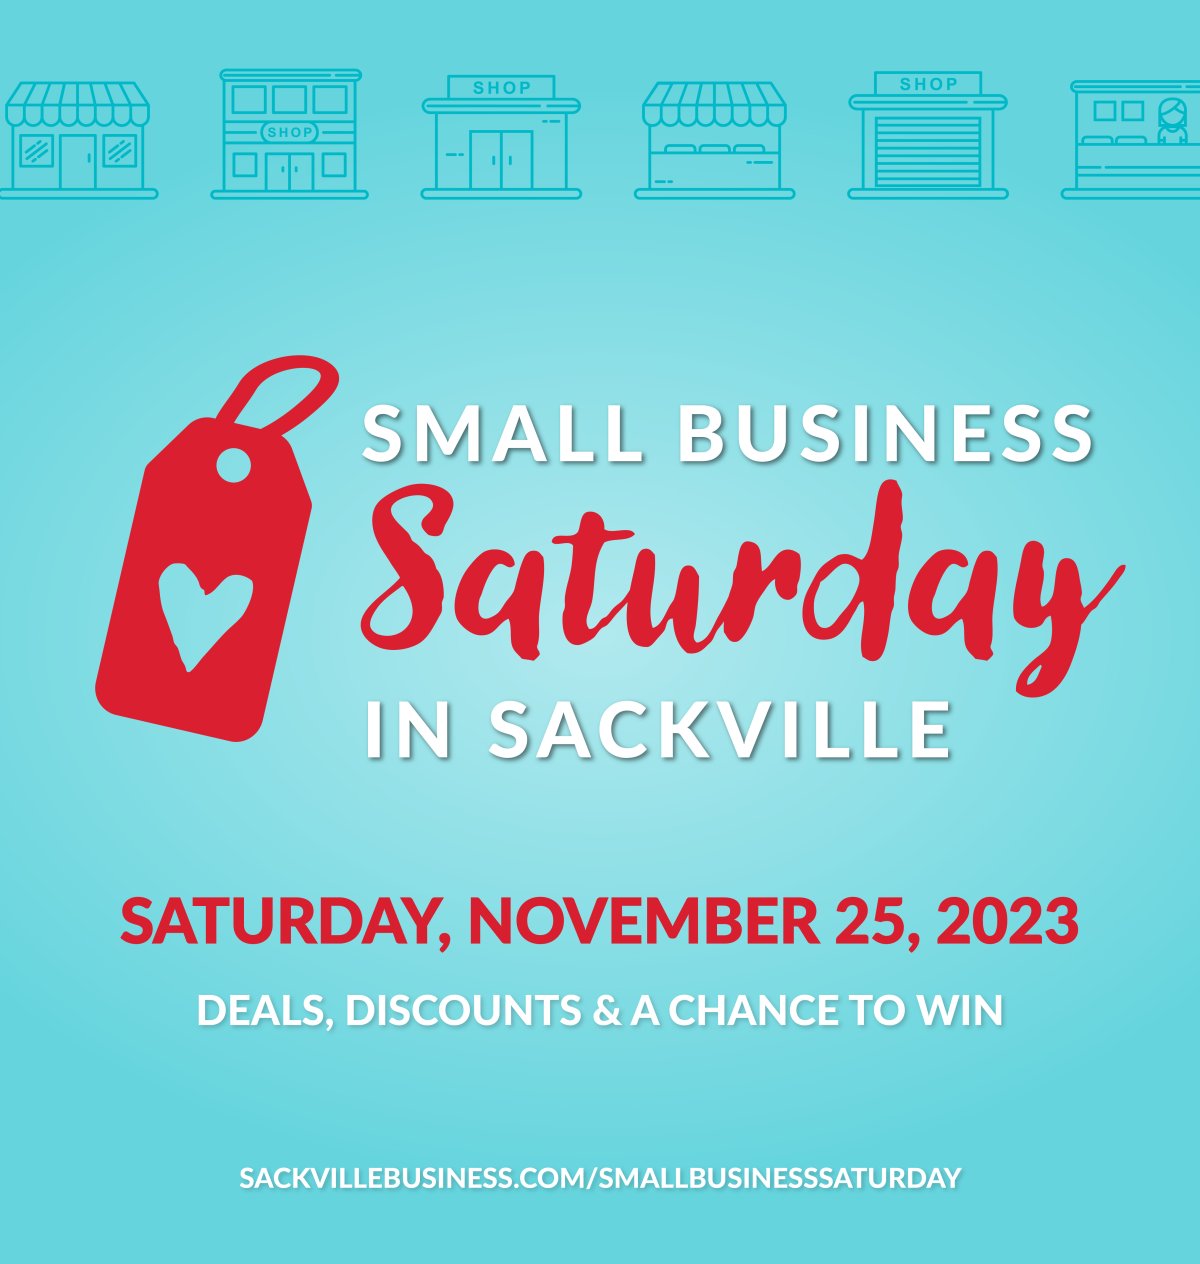 Small Business Saturday - image